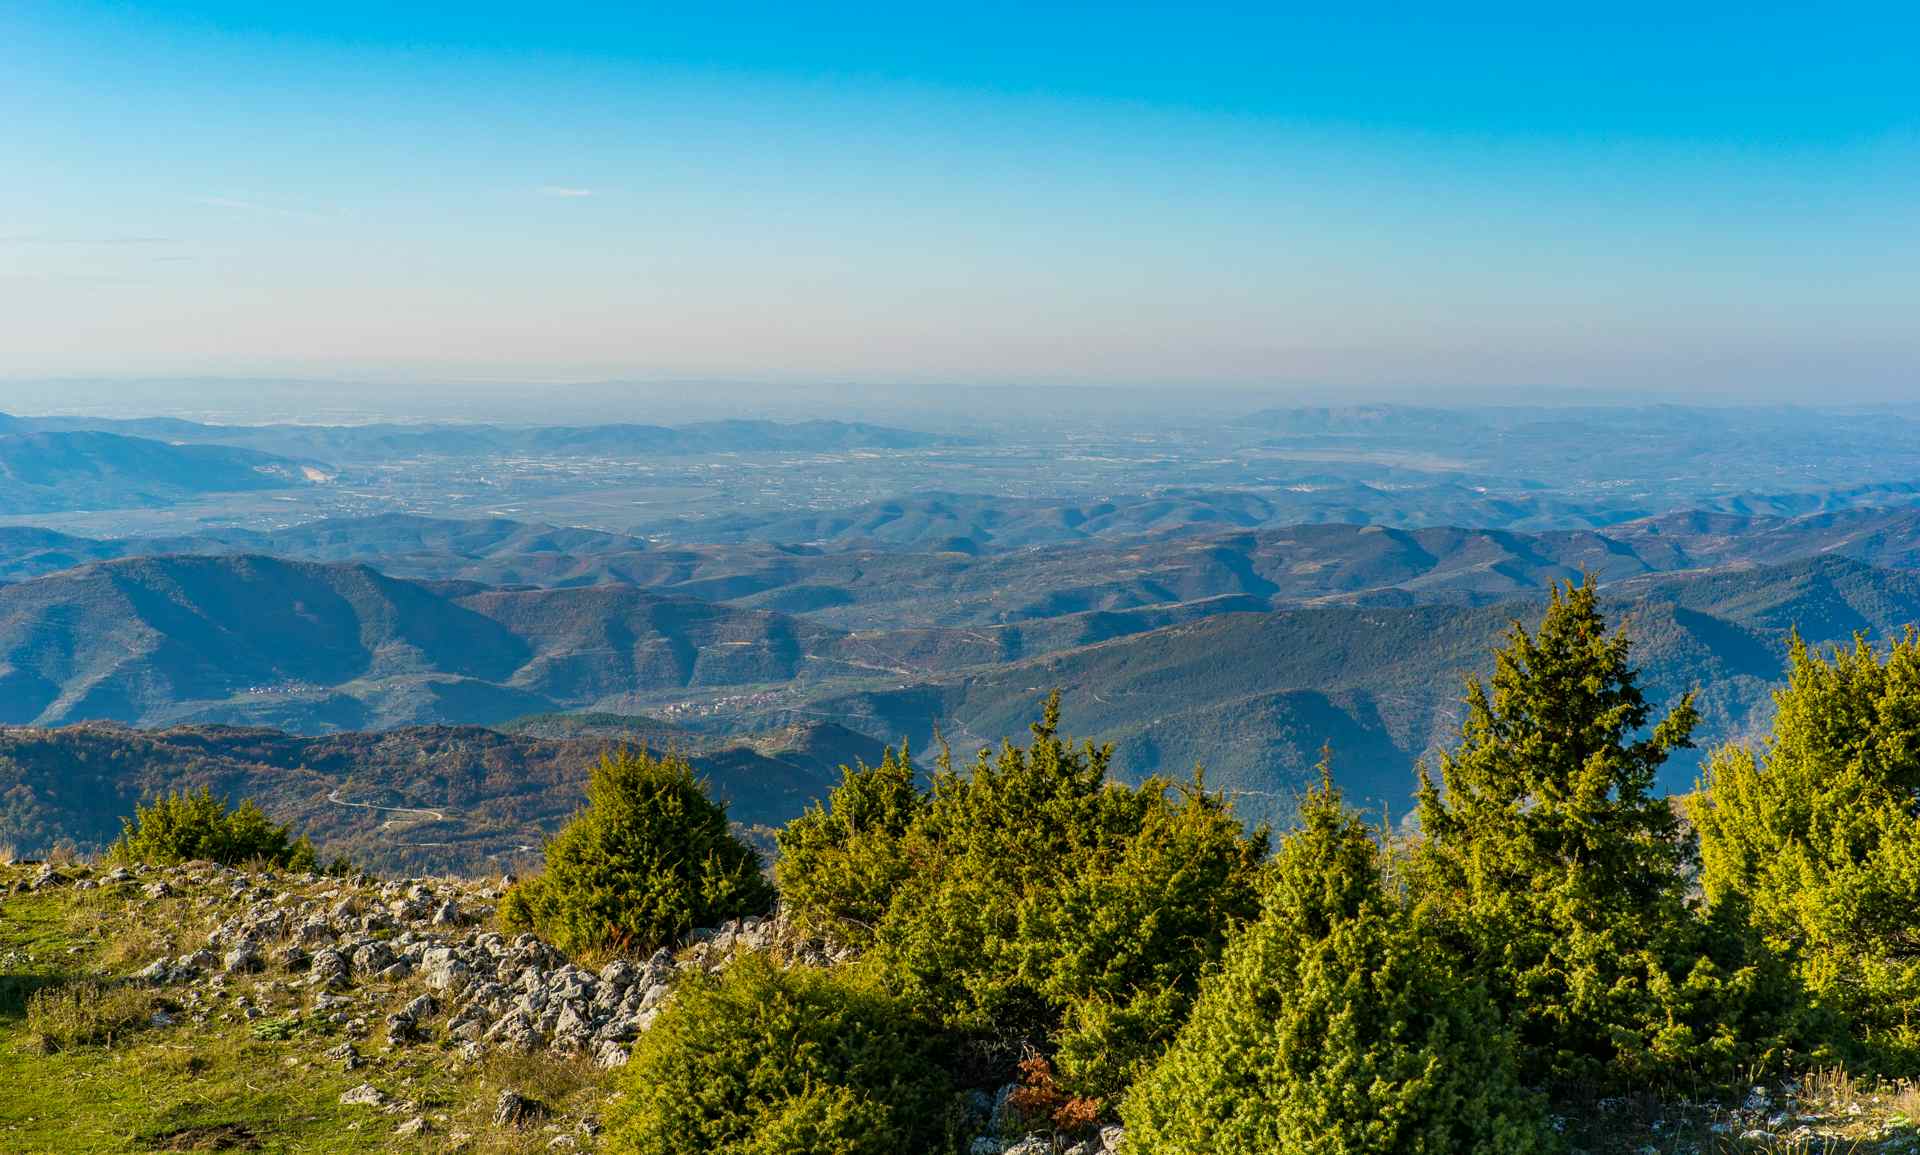 View from Tormorr Mountains, Albania. Photo: Host/Albania Rafting